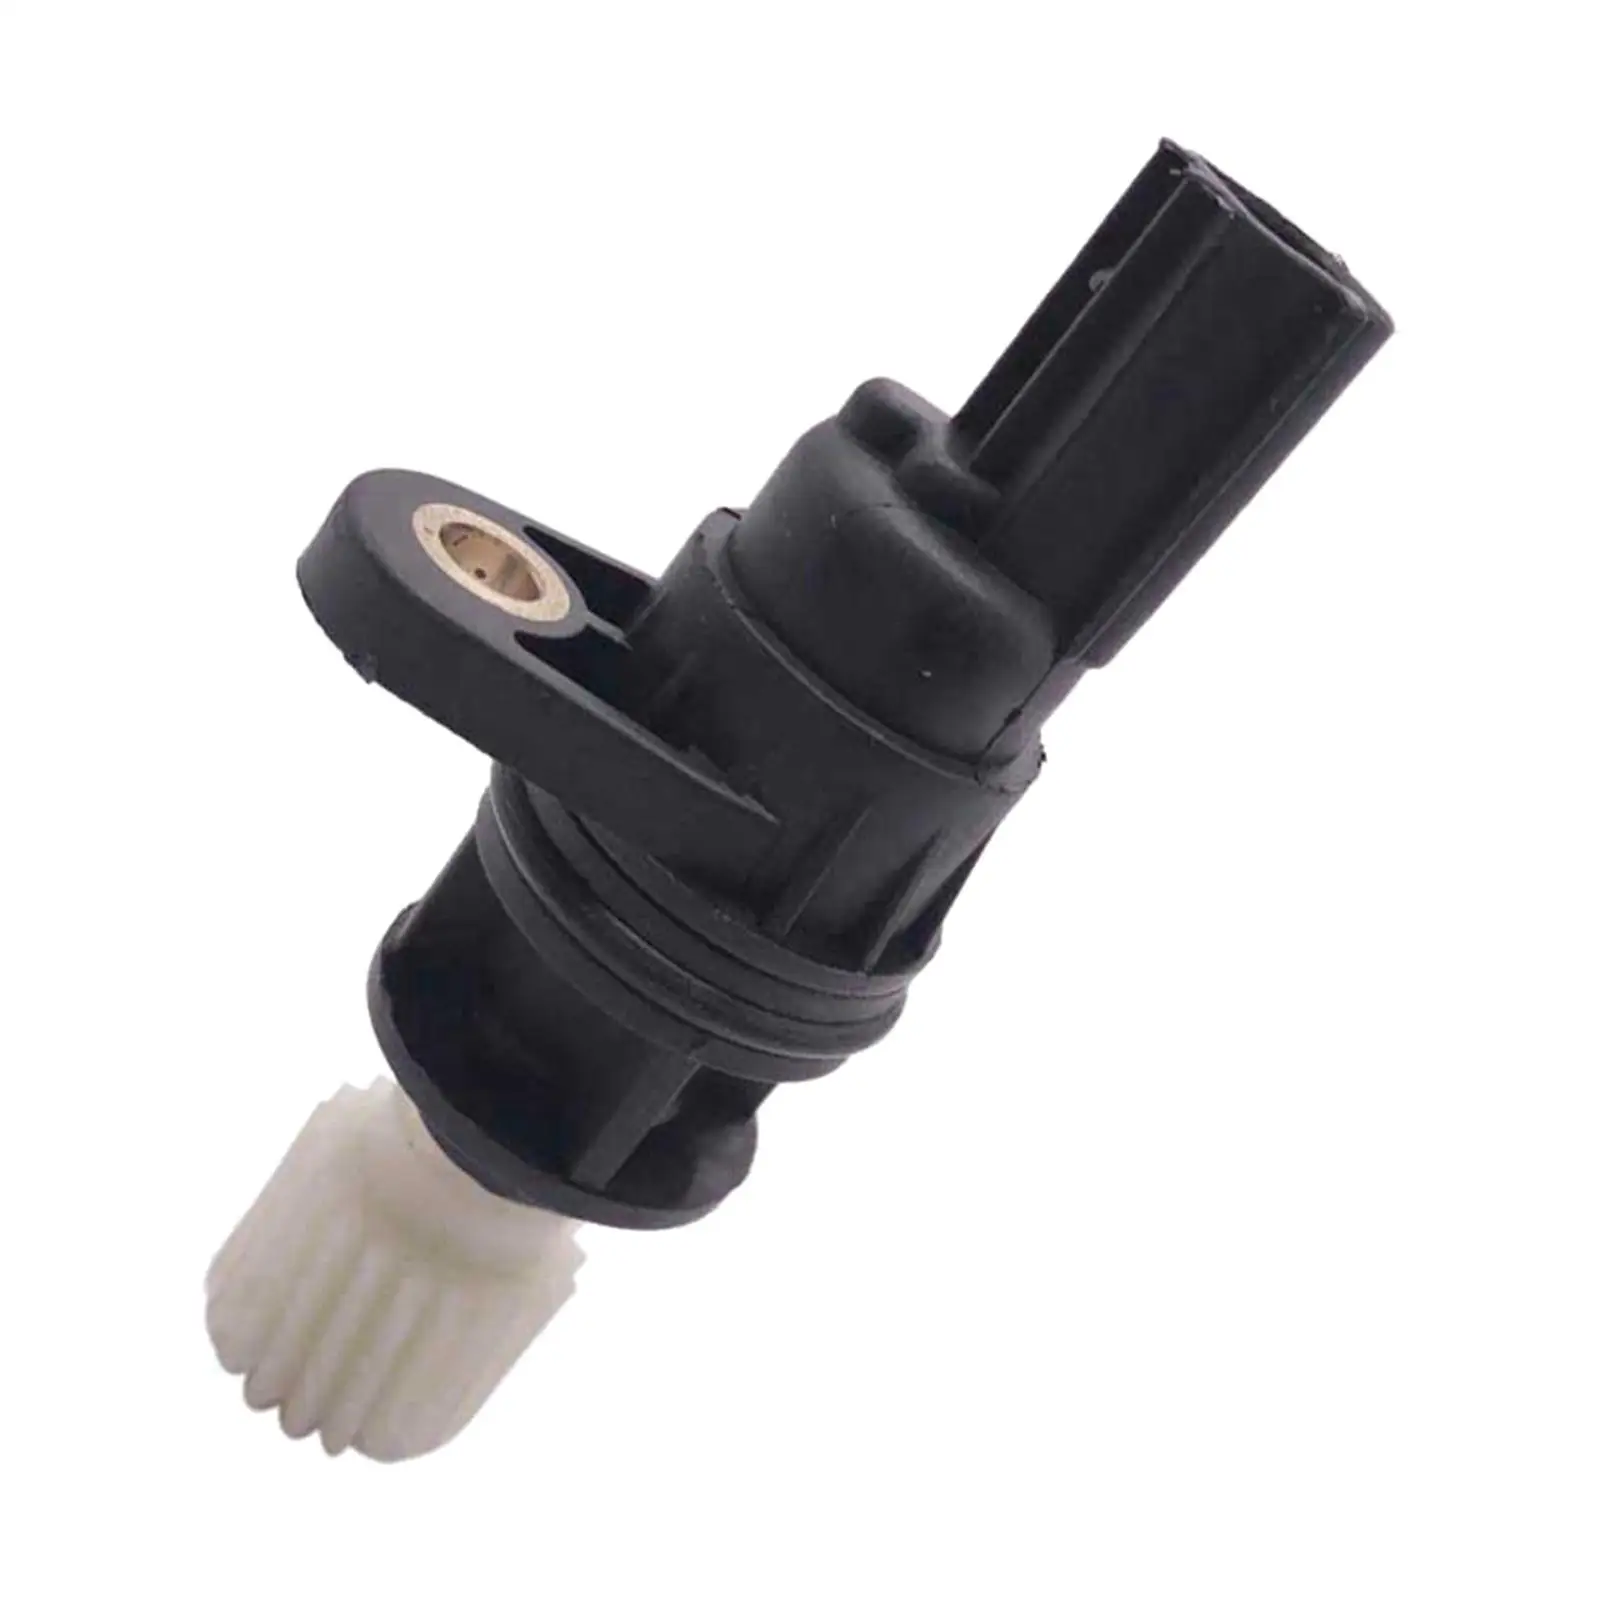 

R510-17400 Speed Sensor M5AC17400 R51017400 for Mazda Accessories Automotive High Parts